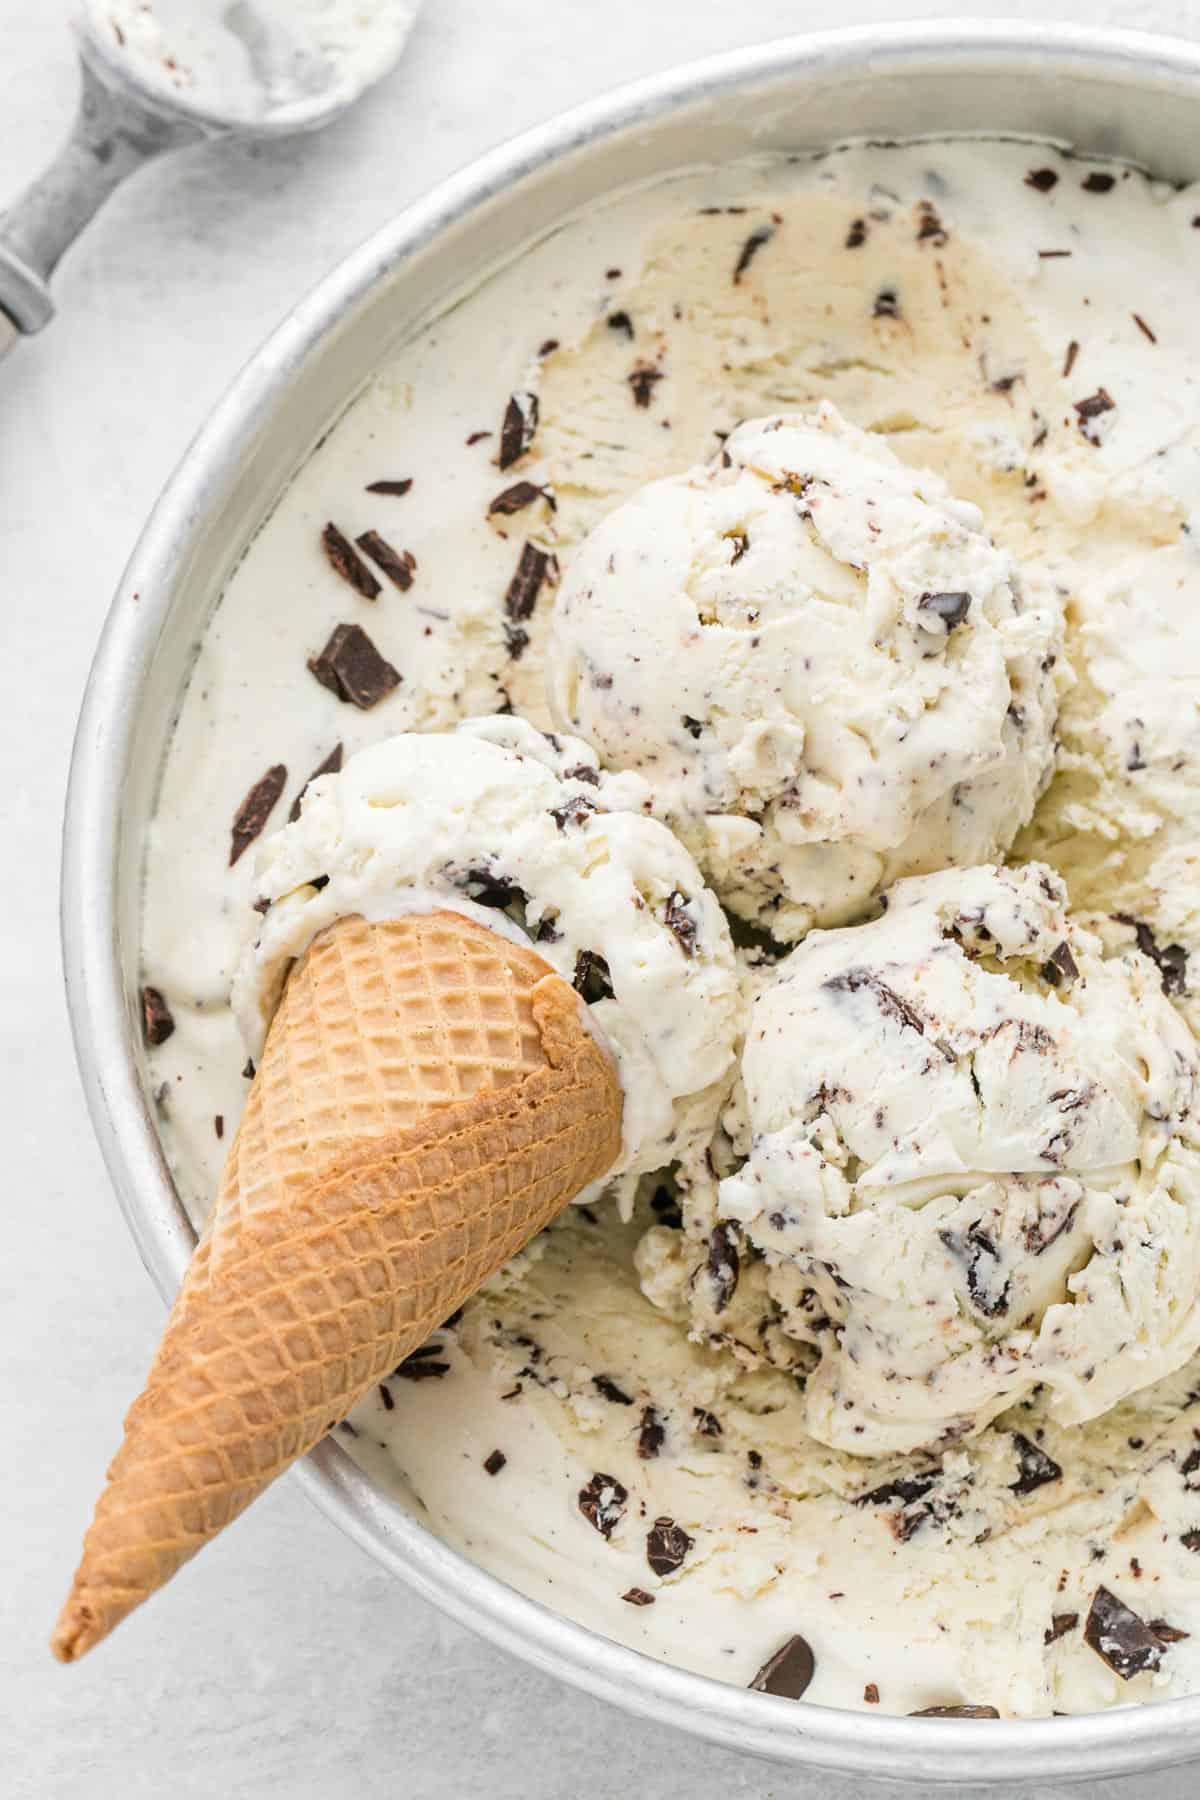 no churn chocolate chip ice cream in round cake pan with 3 scoops and 1 ice cream cone